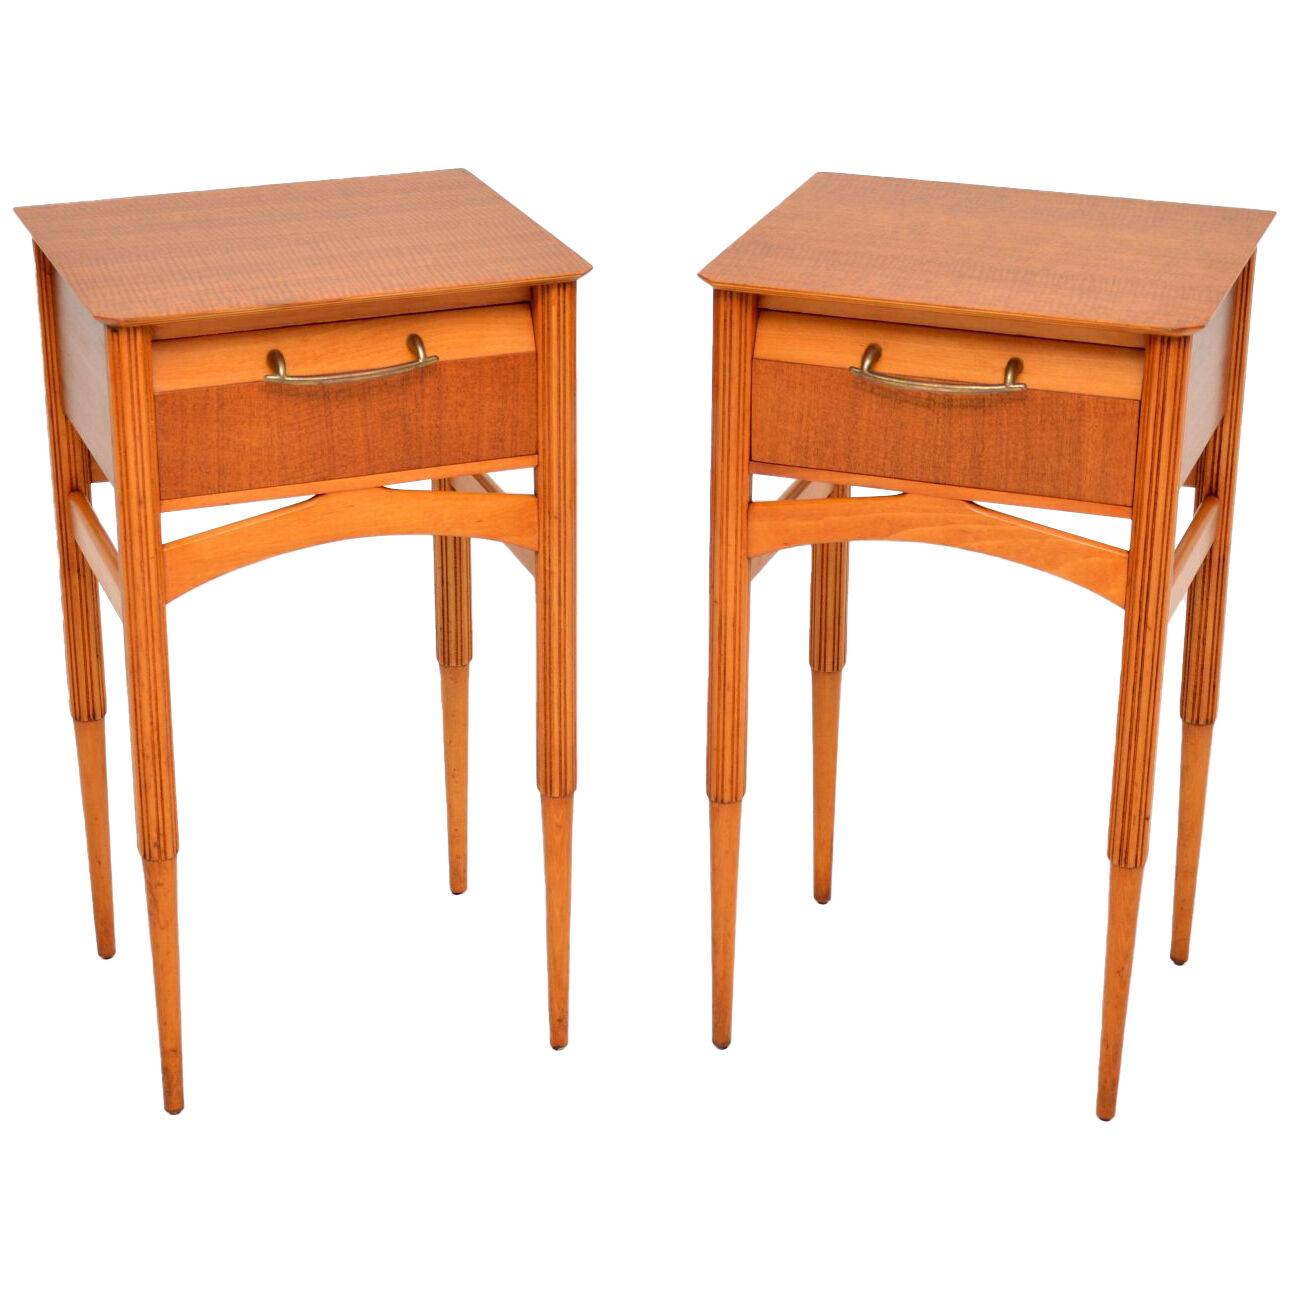 1950's Pair of Satin Wood Side / Bedside Tables